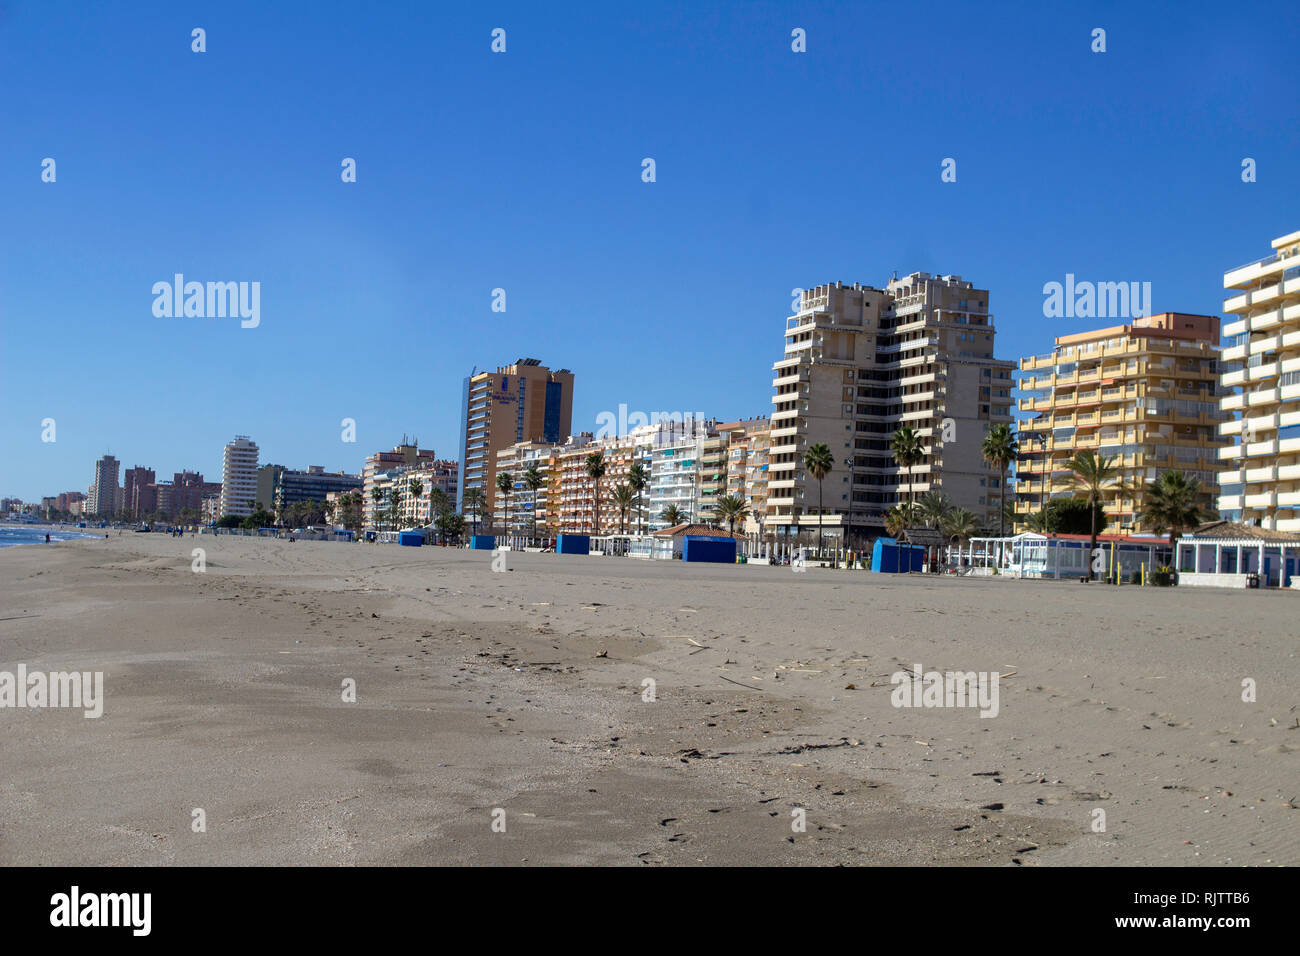 Los Boliches, Spain. The beach in Los Boliches looking towards Fuengirola with holiday apartments in the background. Stock Photo